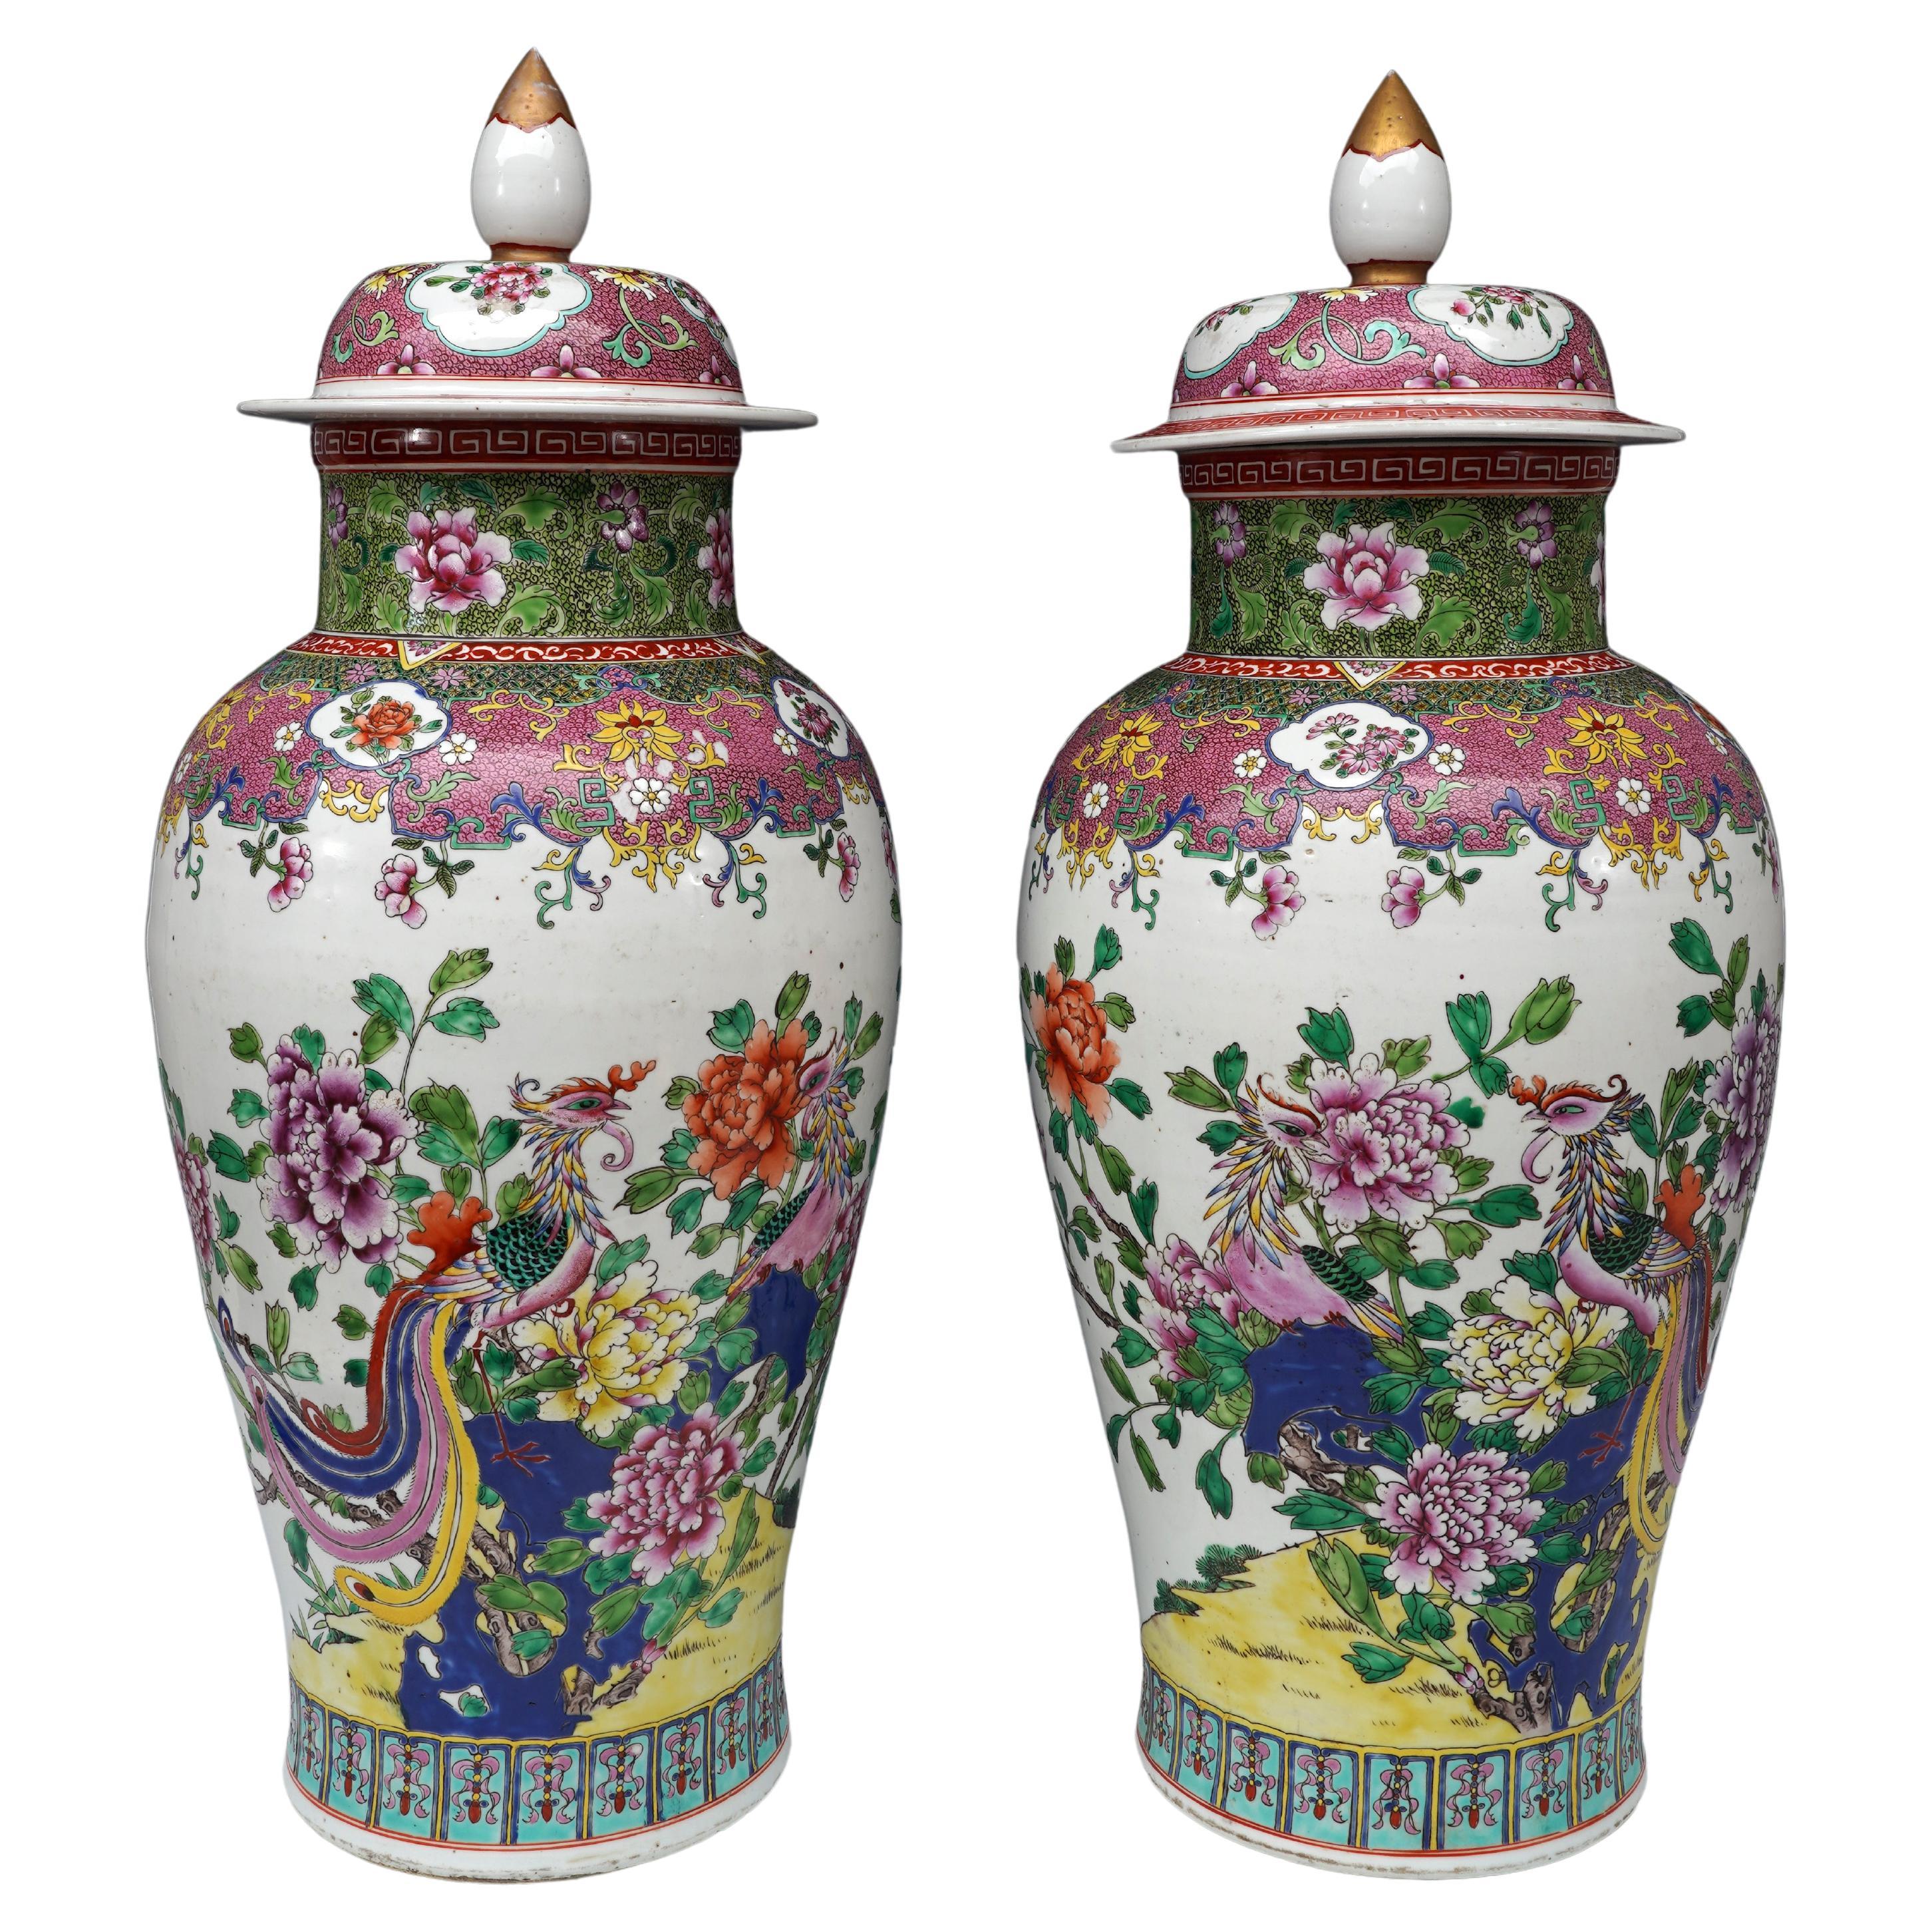 Pair of Ginger Jars with Phoenixes, China, 19th Century